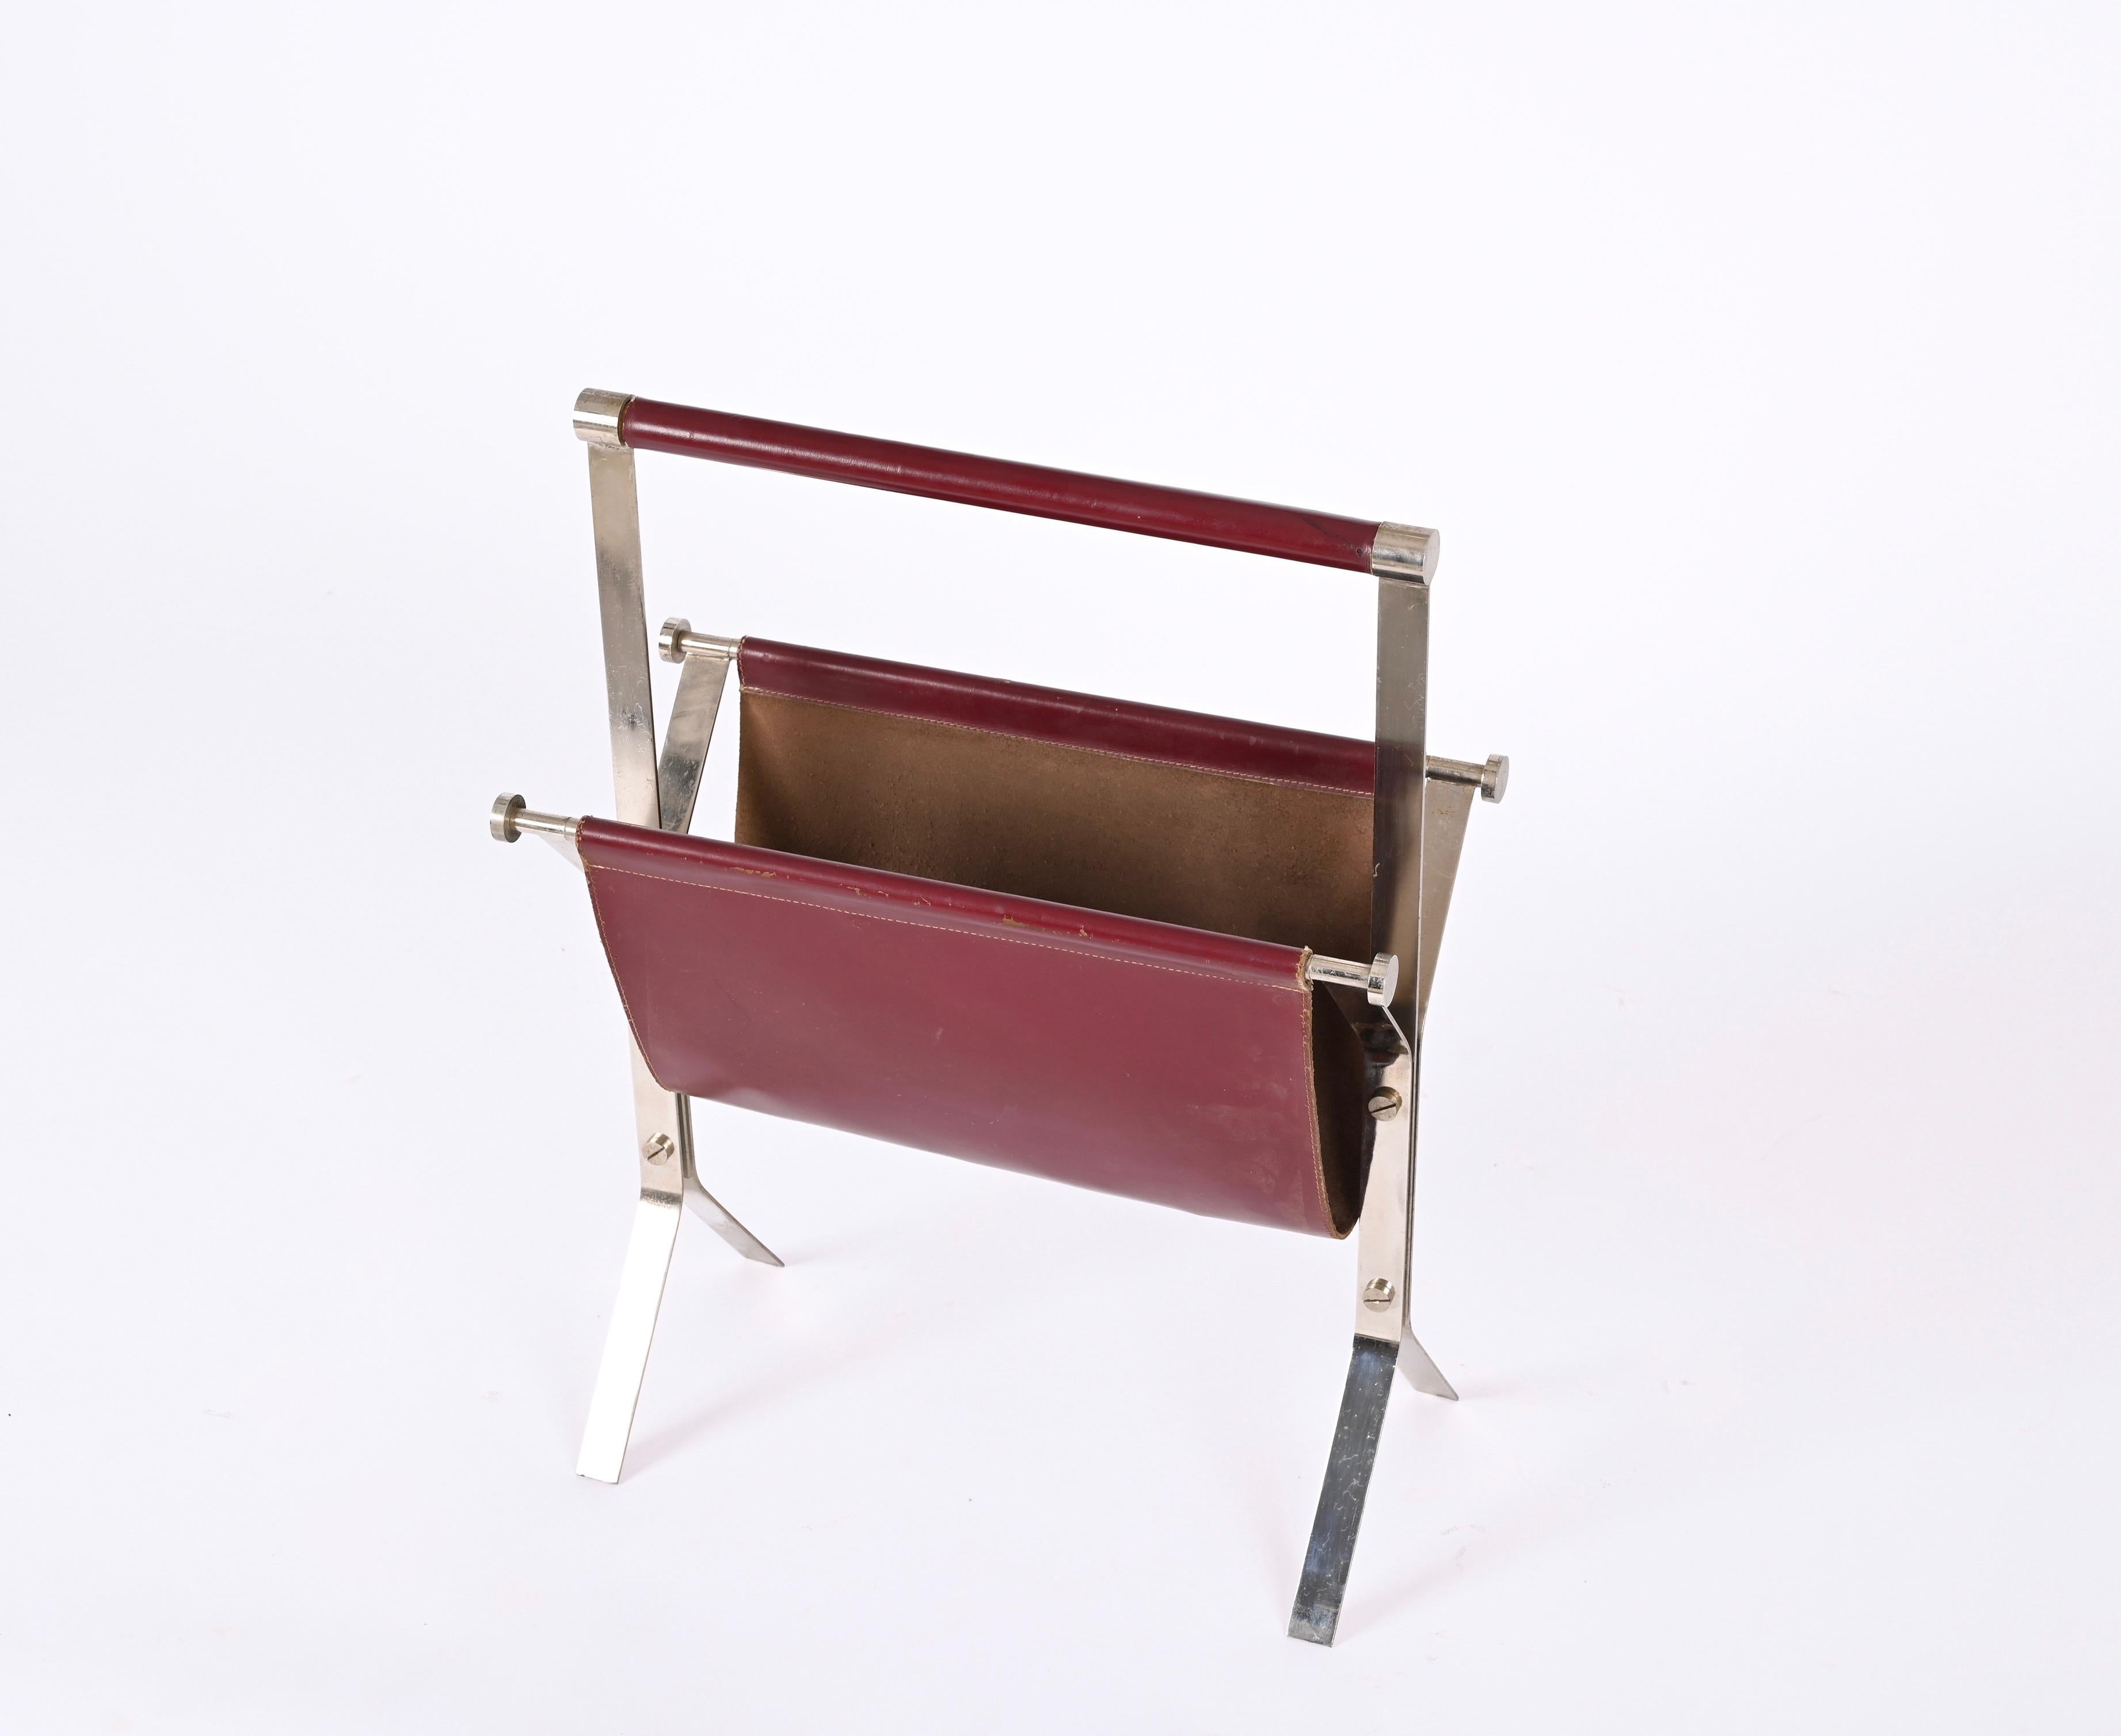 Alessandro Albrizzi Midcentury Chromed Steel and Red Leather Magazine Rack 1970s For Sale 4